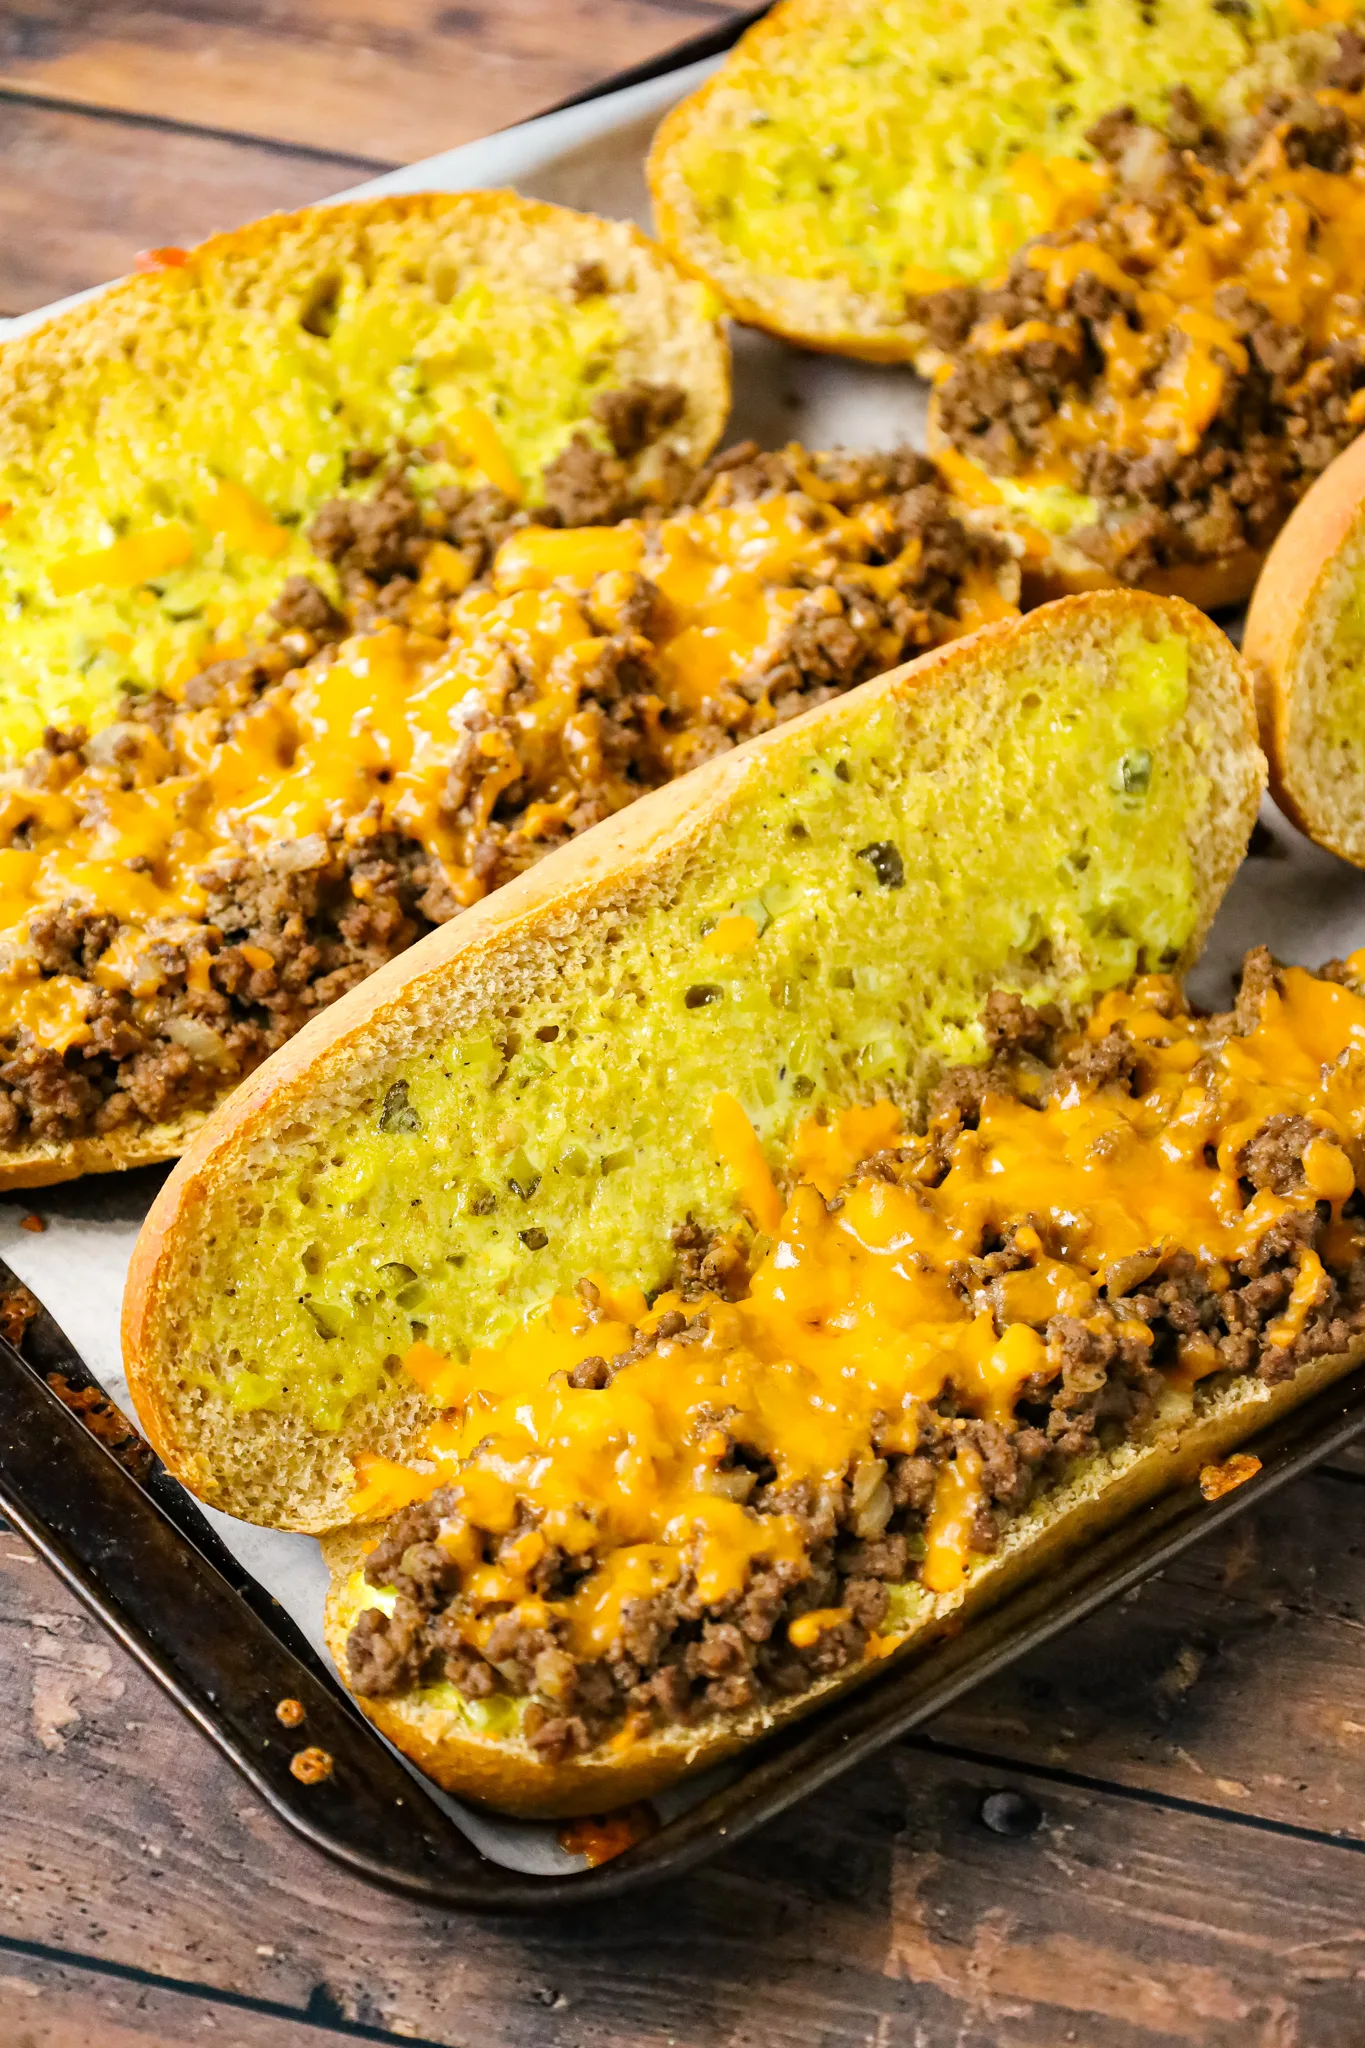 Cheeseburger Subs are an easy family friendly dinner recipe loaded with ground beef, shredded cheddar cheese on a bun spread with a special mayo sauce.